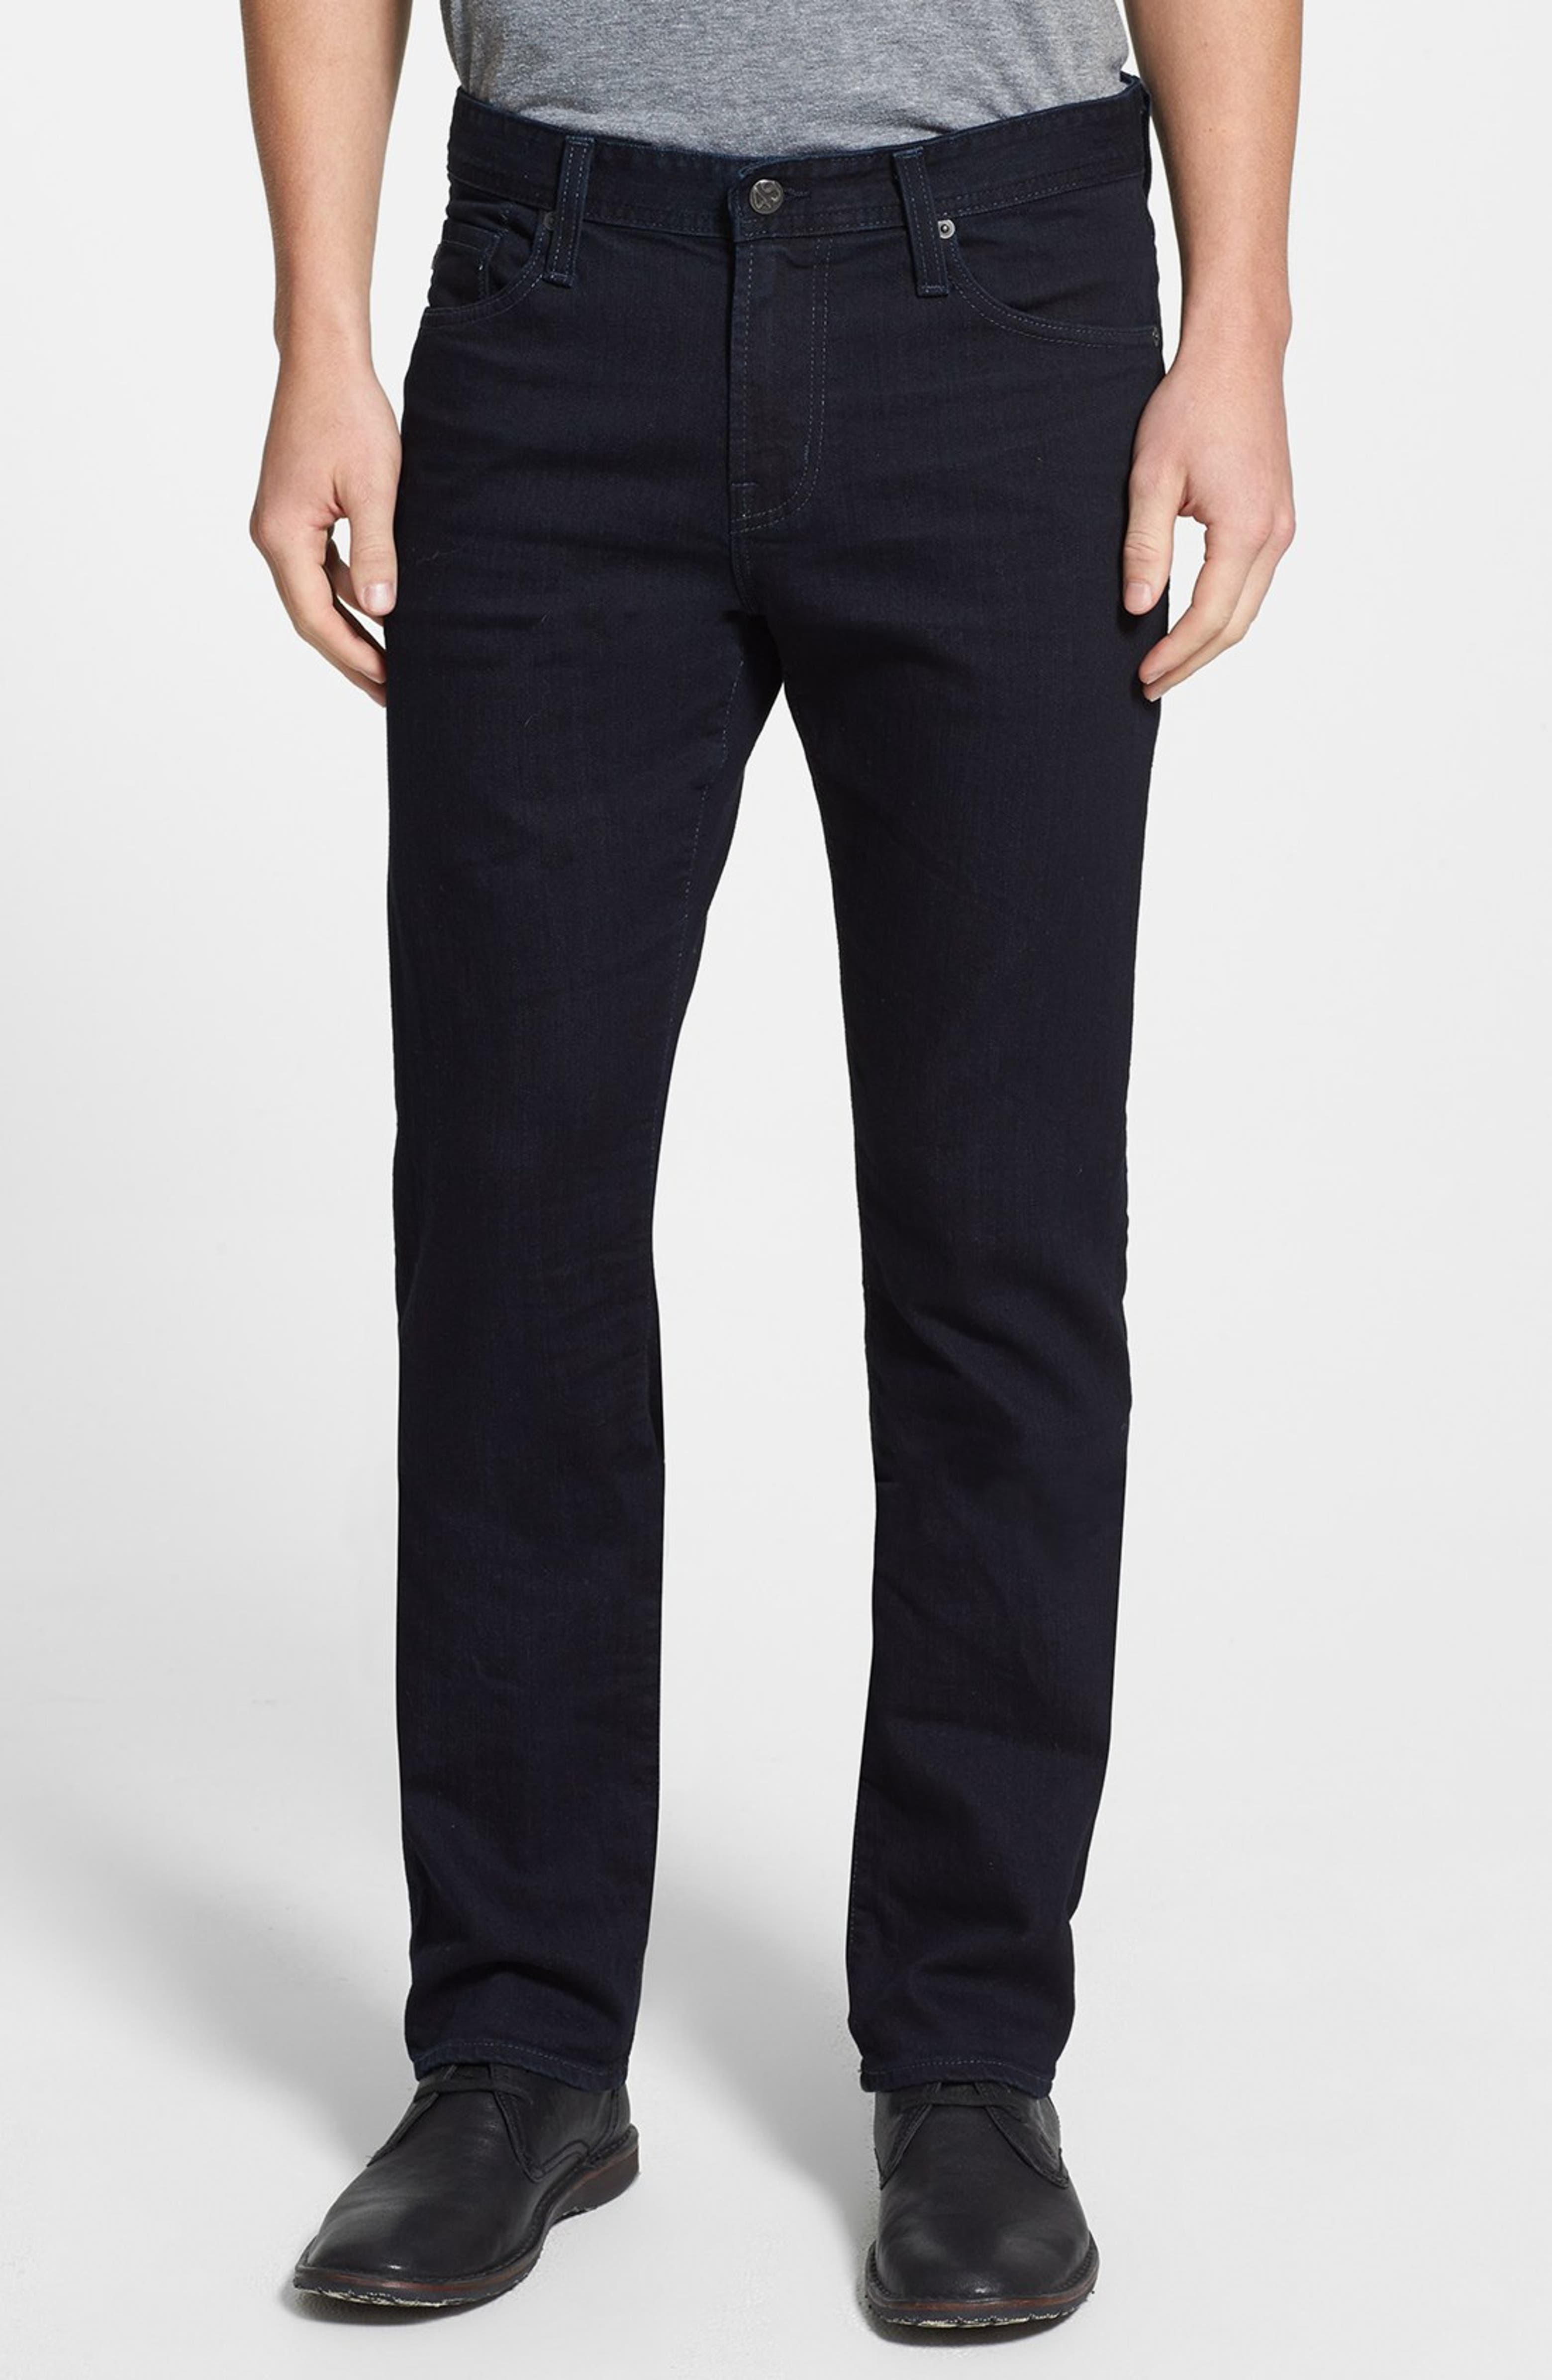 AG 'Graduate' Tailored Fit Straight Leg Jeans (13 Year Origin) | Nordstrom